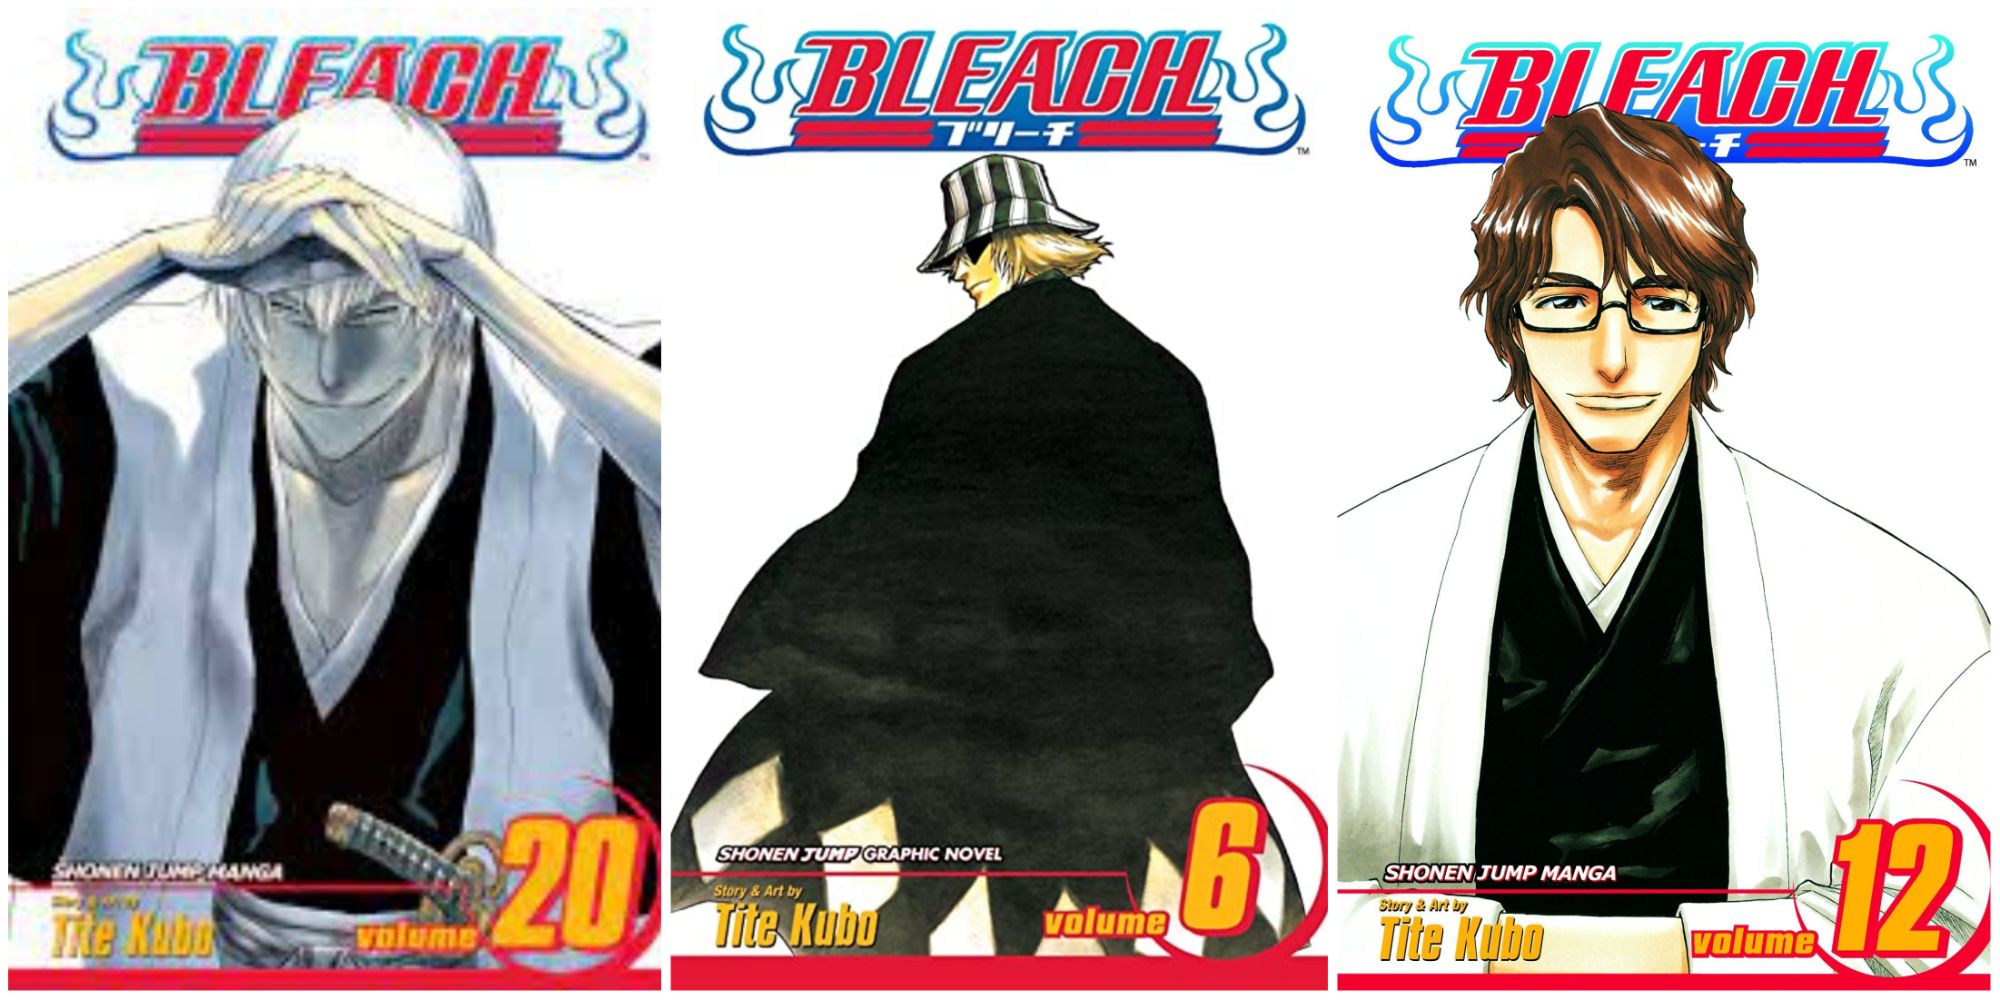 The 10 Best Manga Volumes Of Bleach (According To Goodreads)